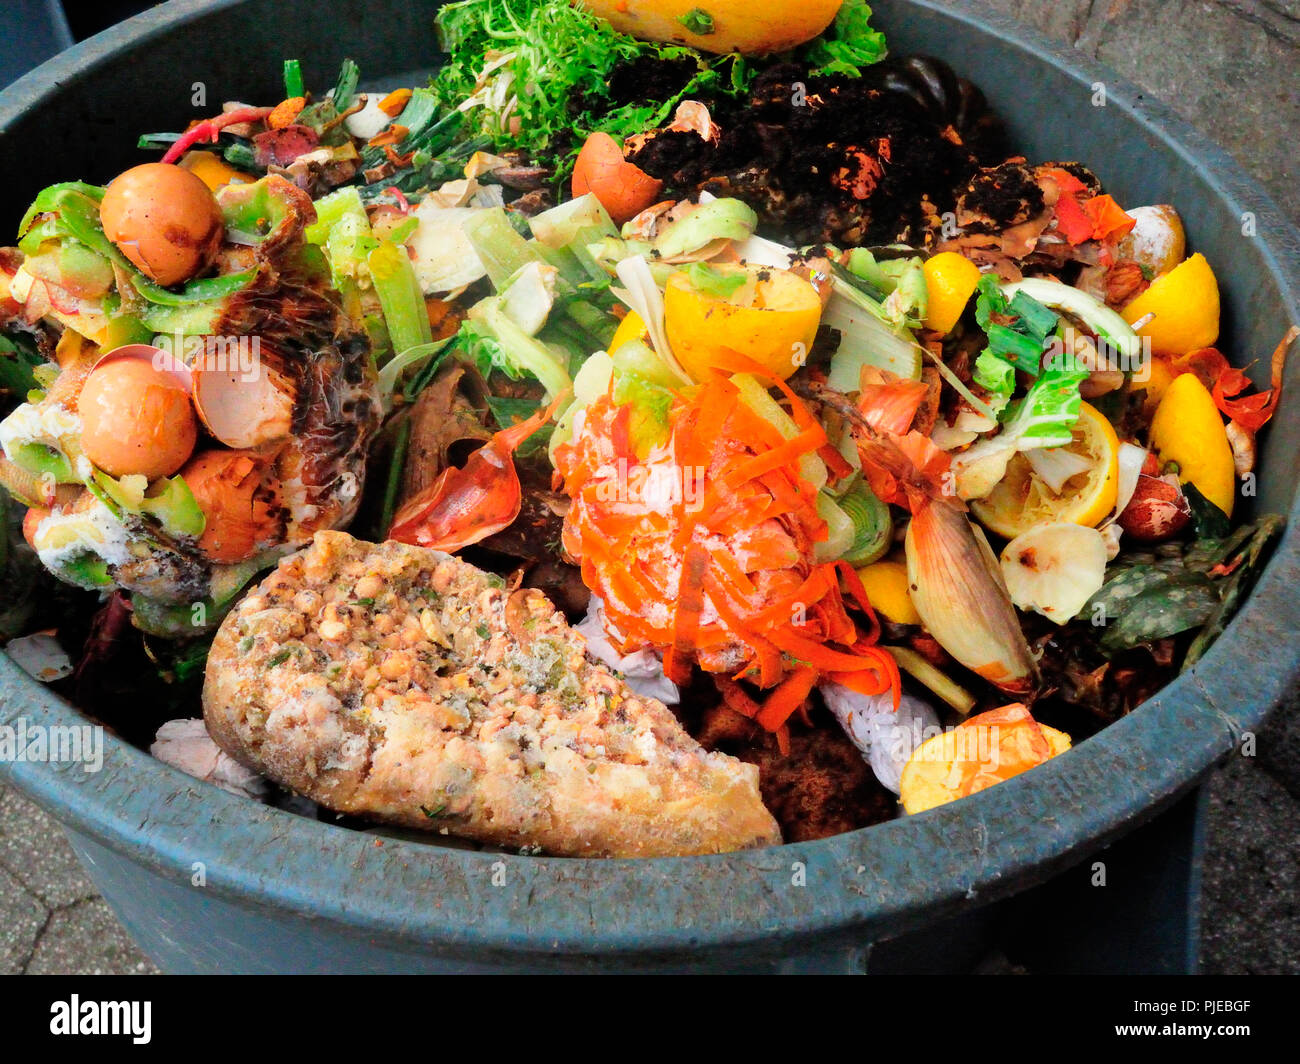 Close up of Food Scraps in Compost Bin Stock Photo